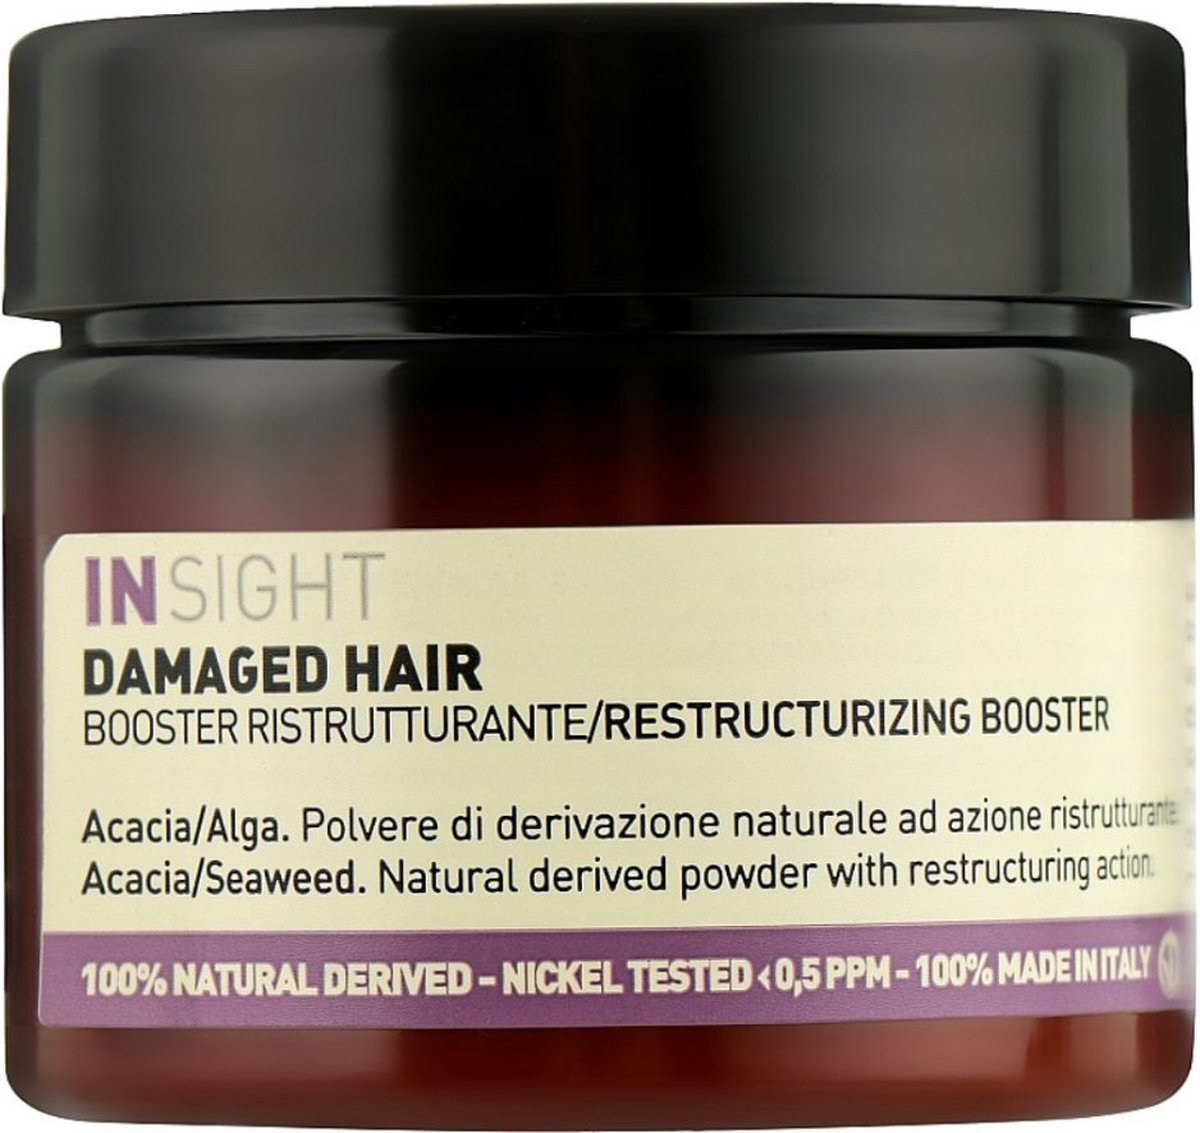 Insight - Damaged Hair Restructurizing Booster - 35gr